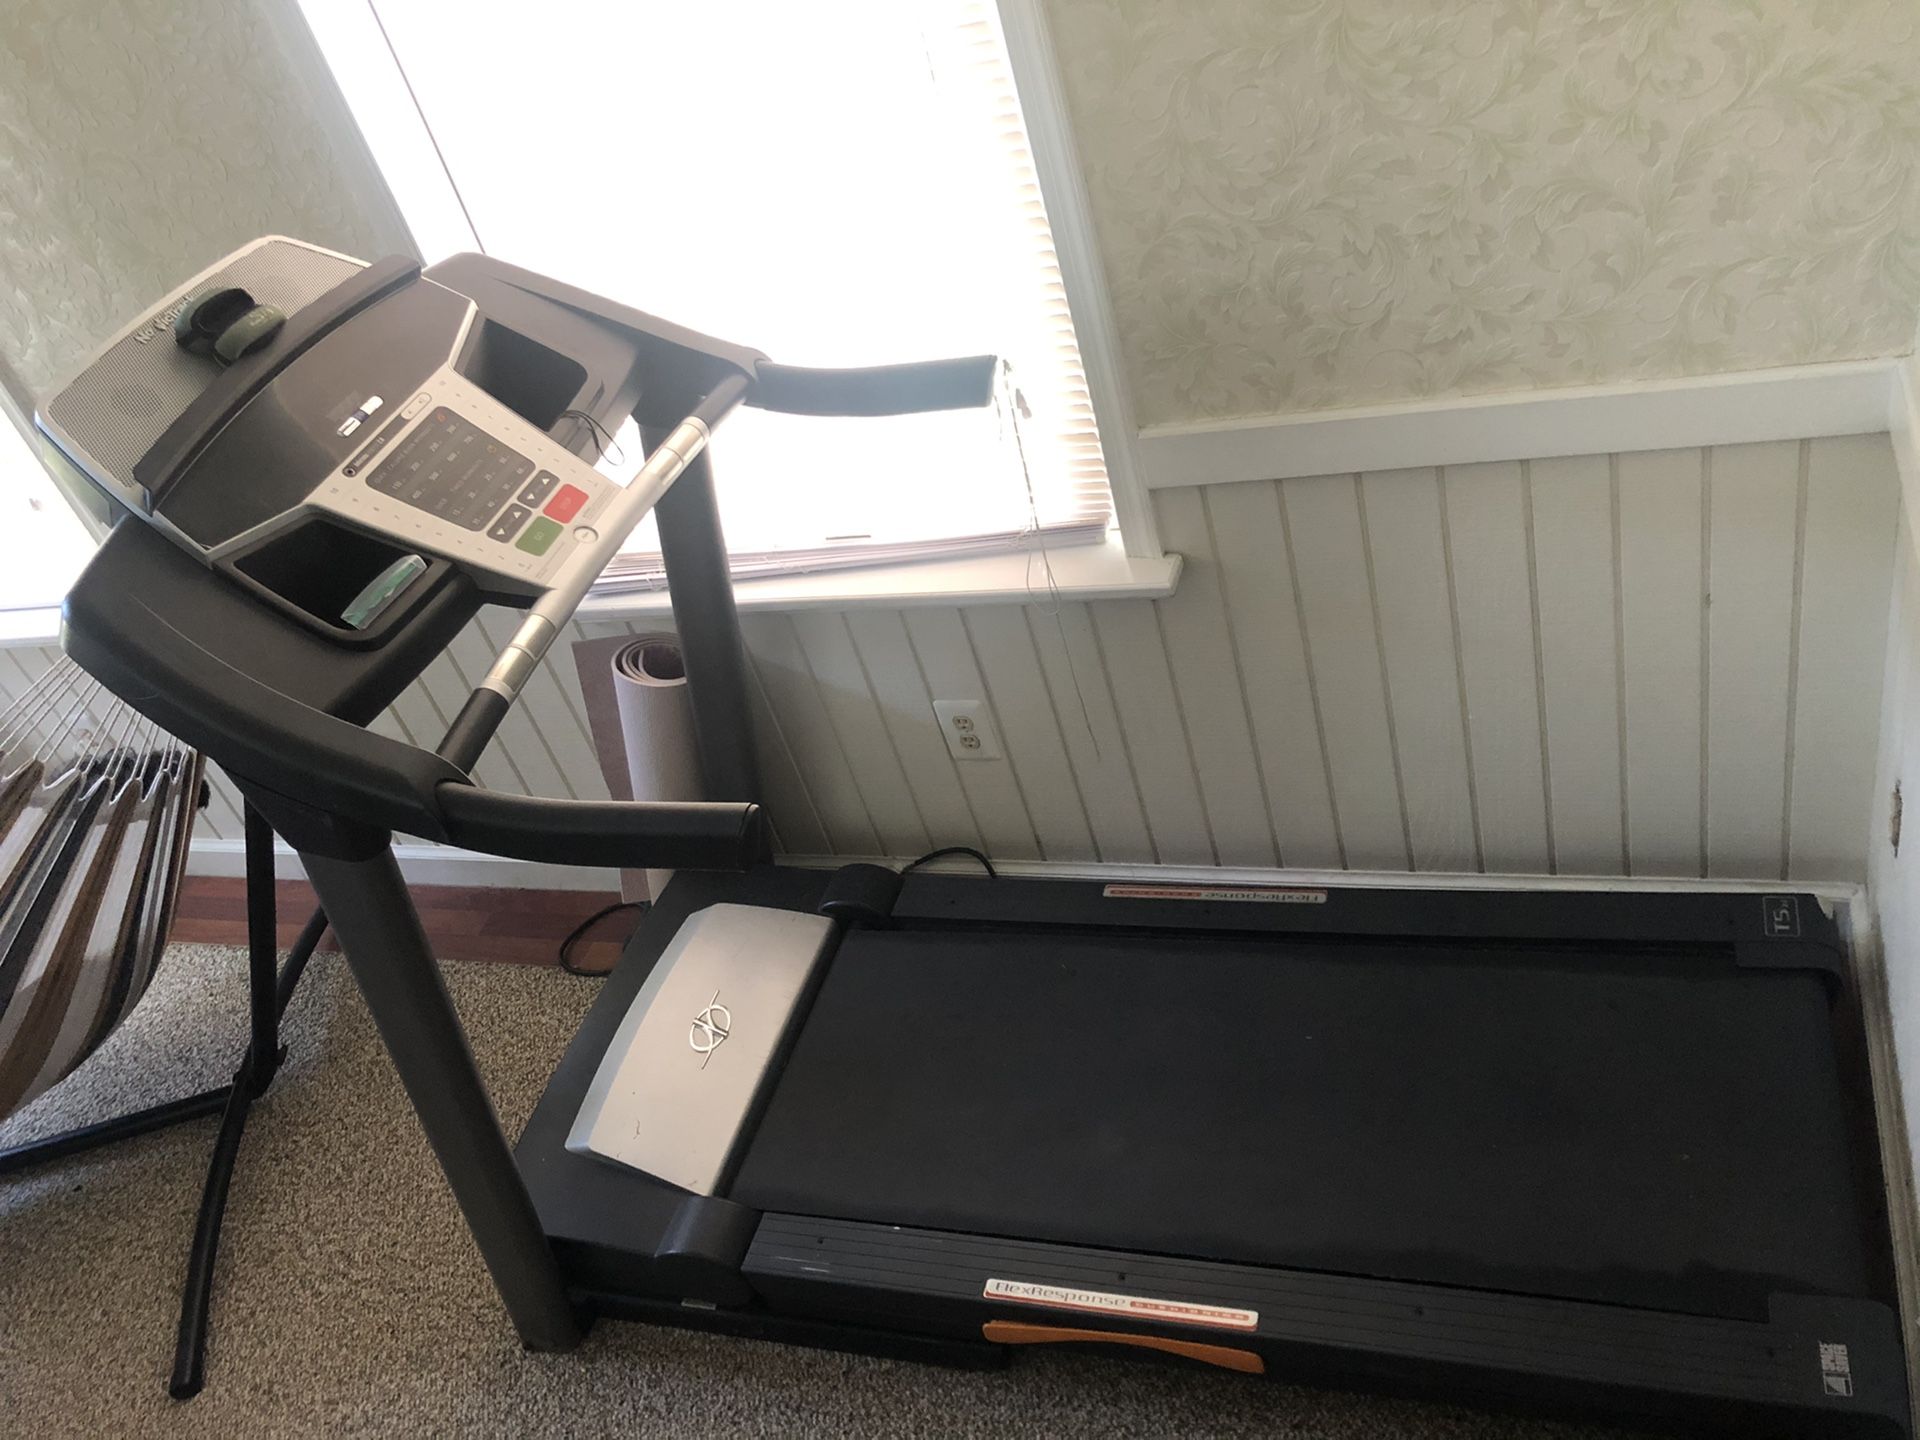 NordicTrack T5.z1 treadmill - needs to go ASAP